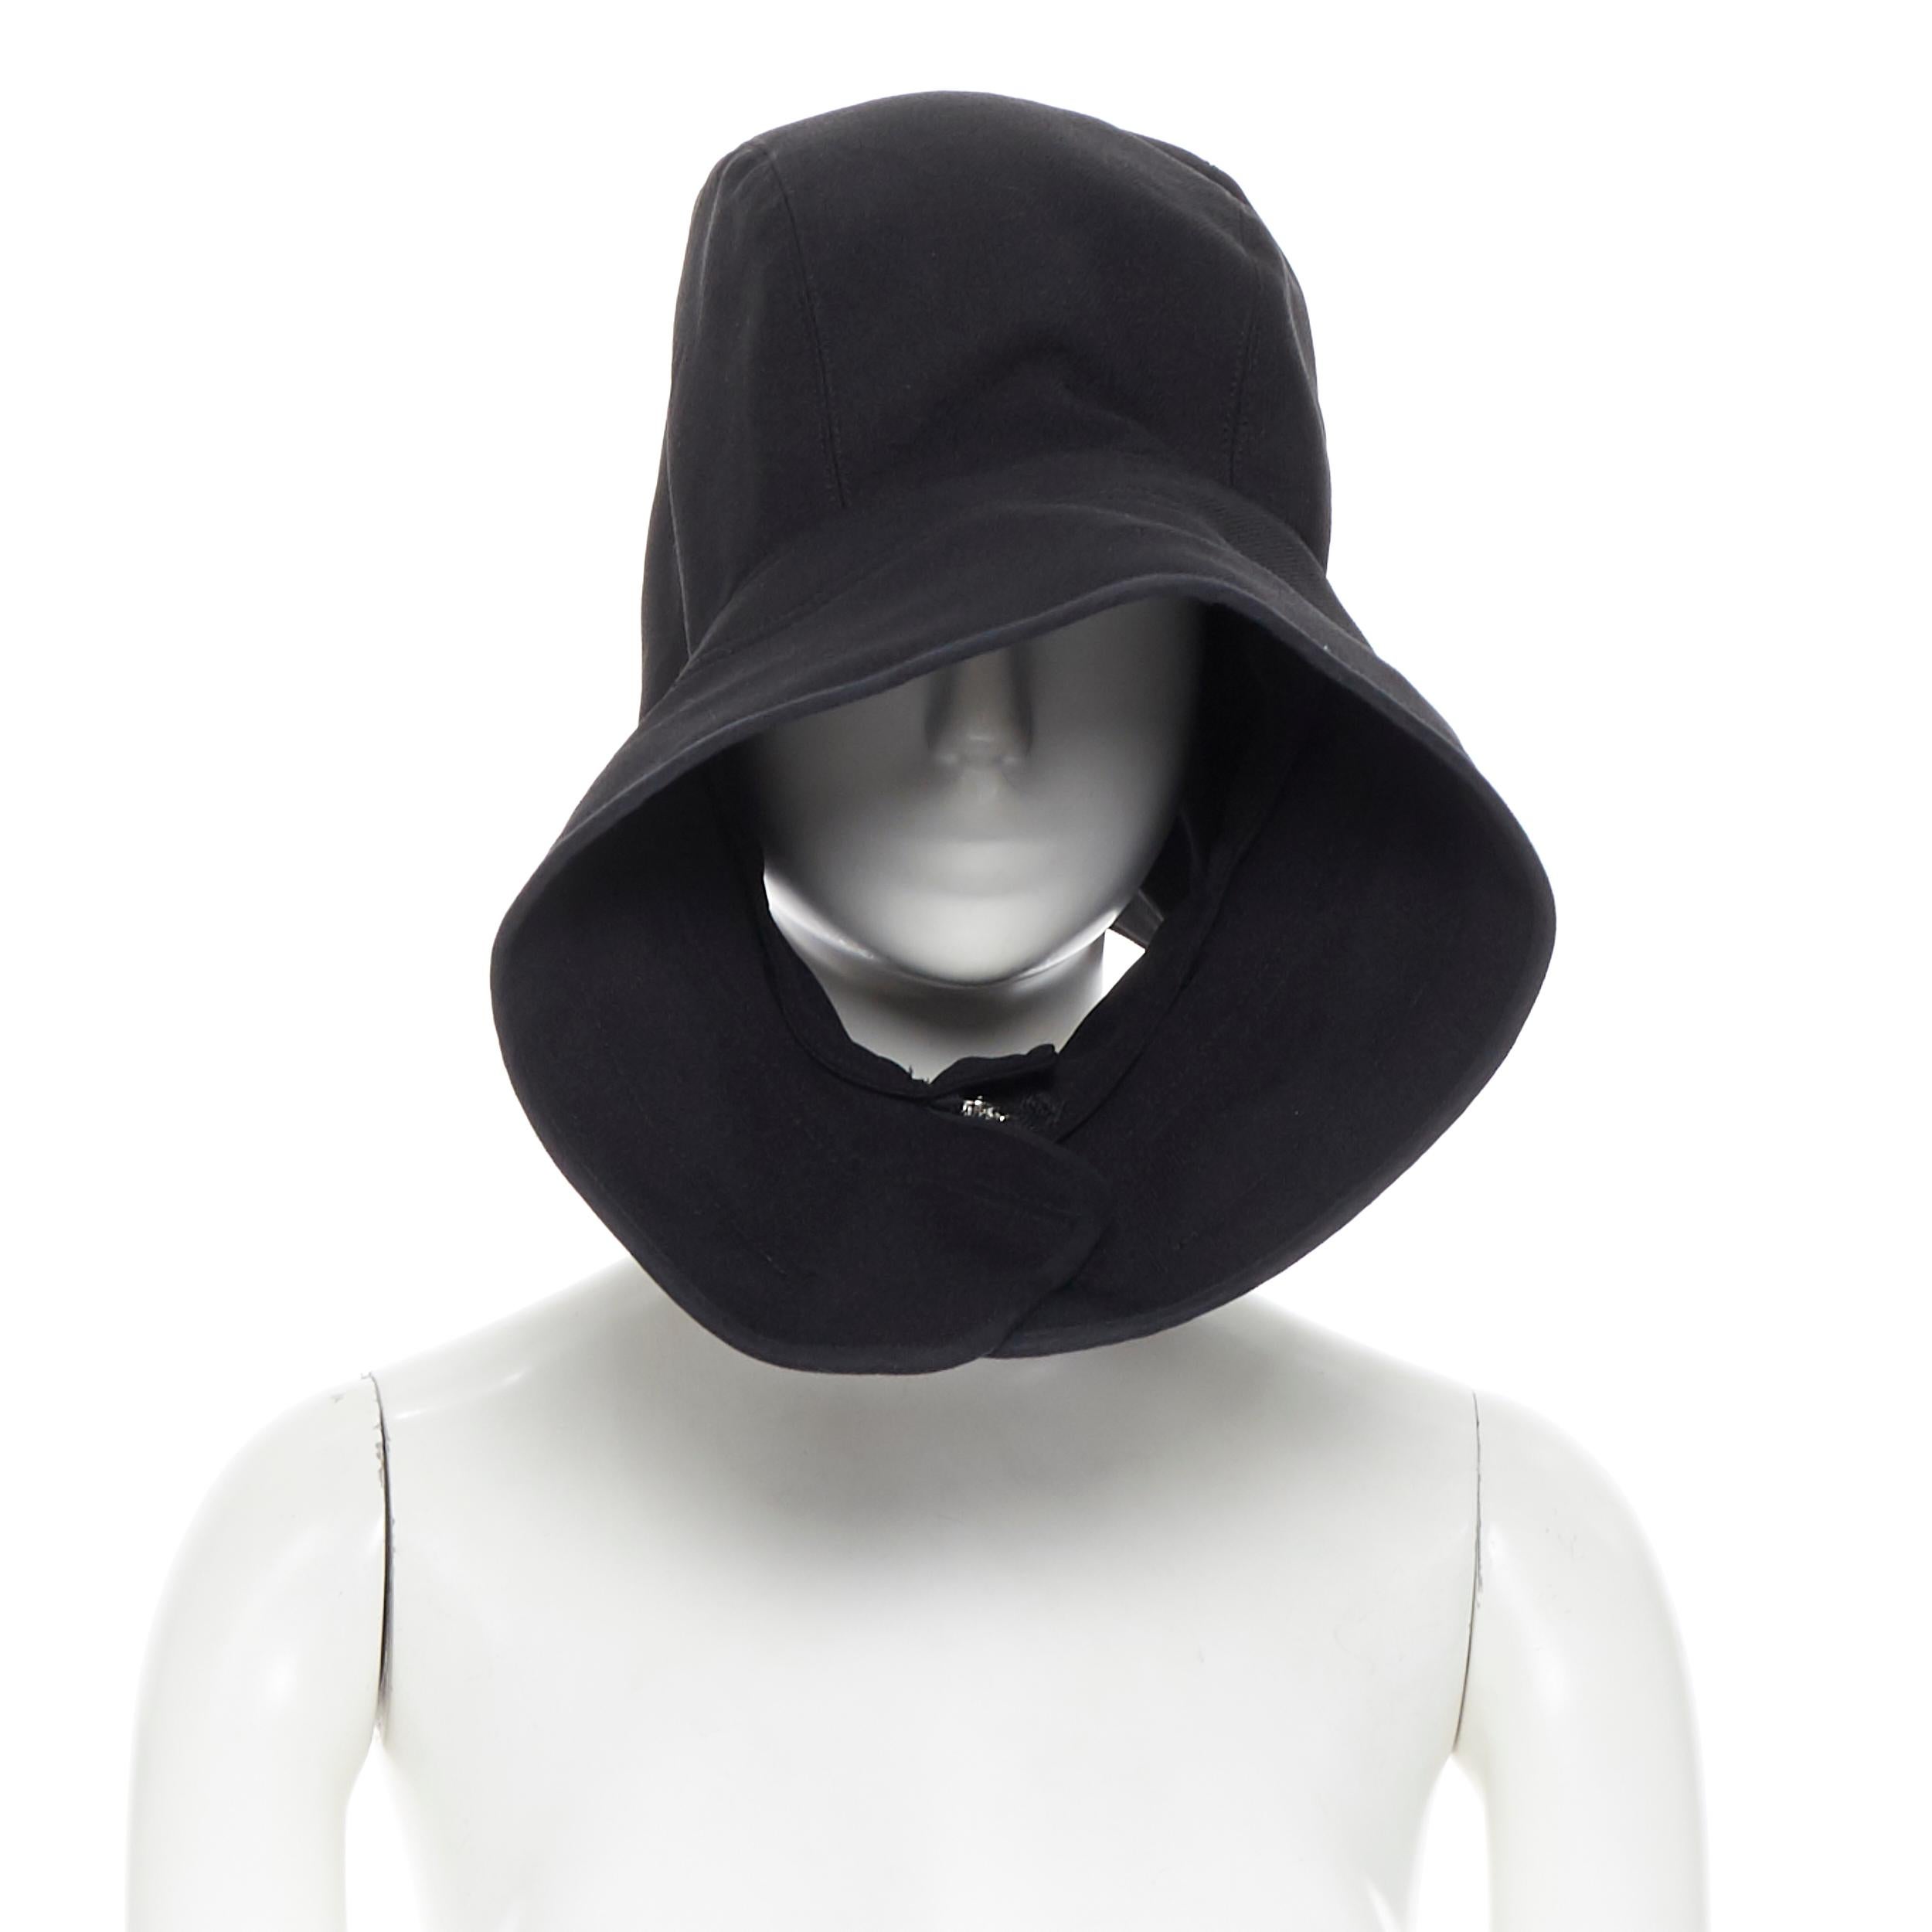 COMME DES GARCONS black zip toggle button upside down brim snood hat
Brand: Comme Des Garcons
Designer: Rei Kawakubo
Model Name / Style: Snood hood
Material: Polyester
Color: Black
Pattern: Solid
Closure: Zip
Extra Detail: Designed to look like a